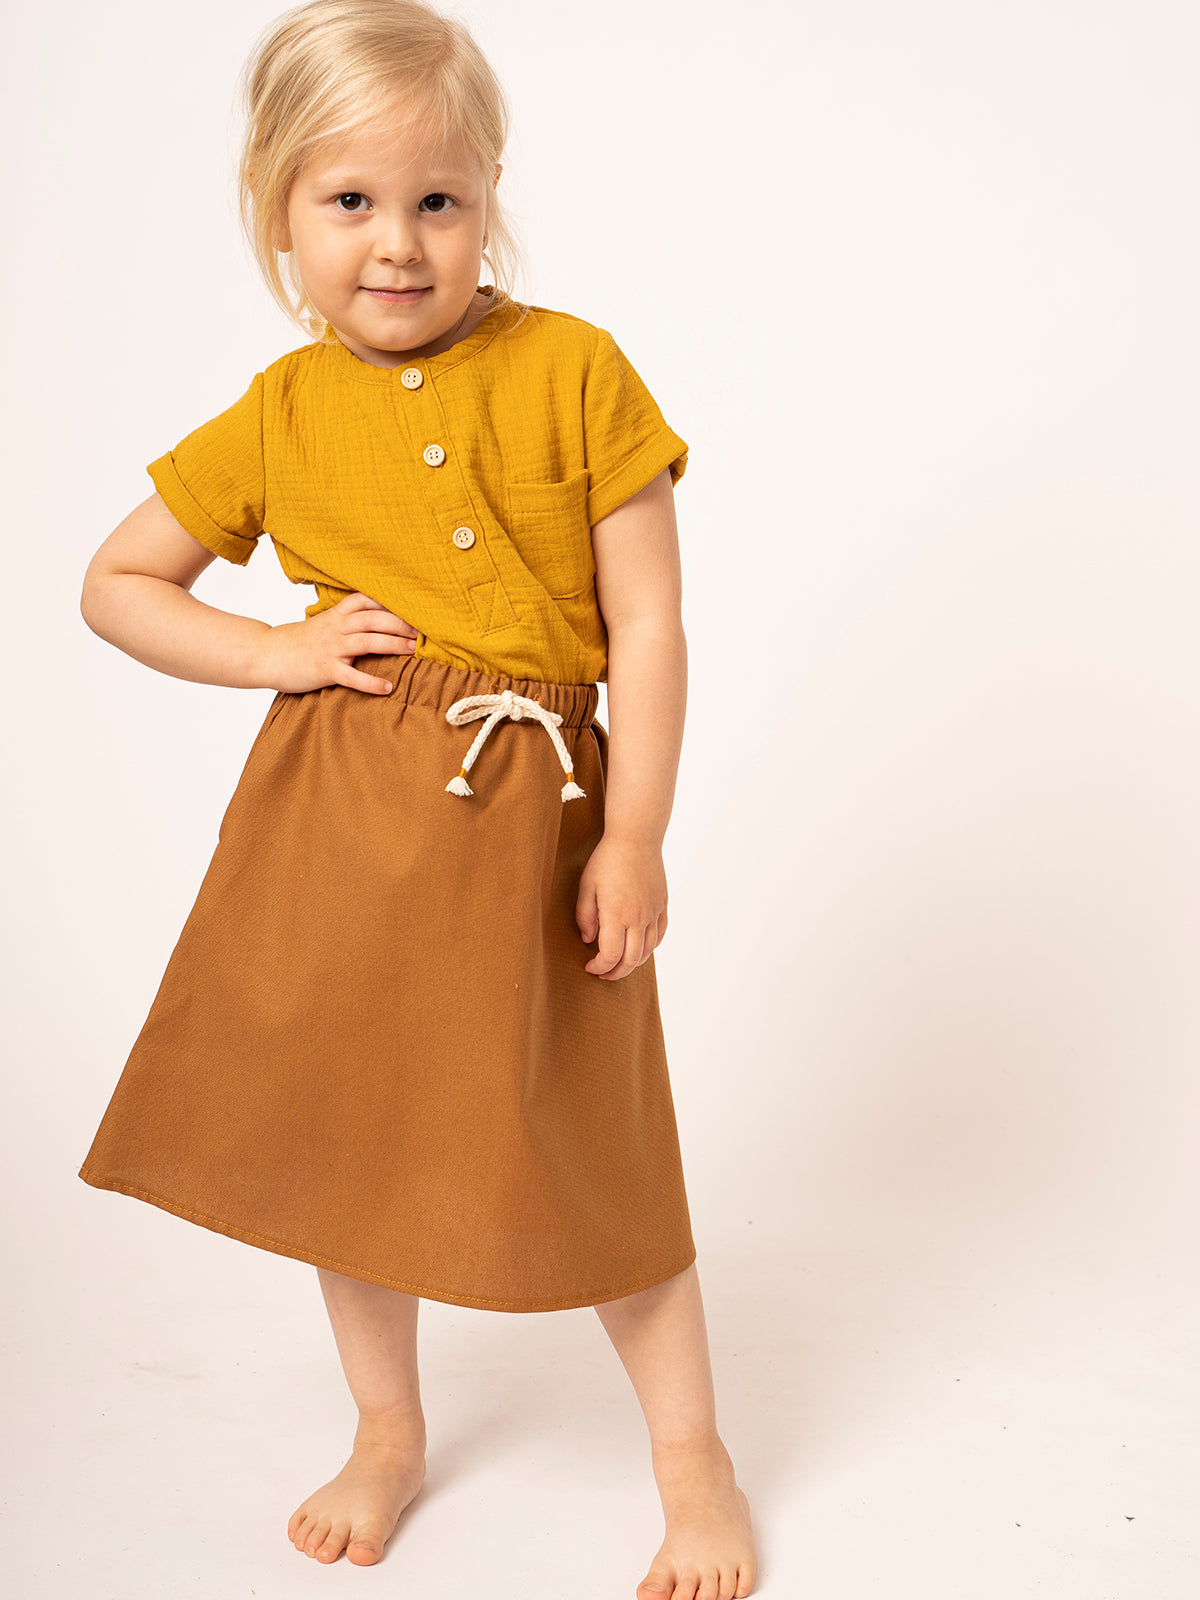 Girl's skirt in mustard-colored cotton canvas